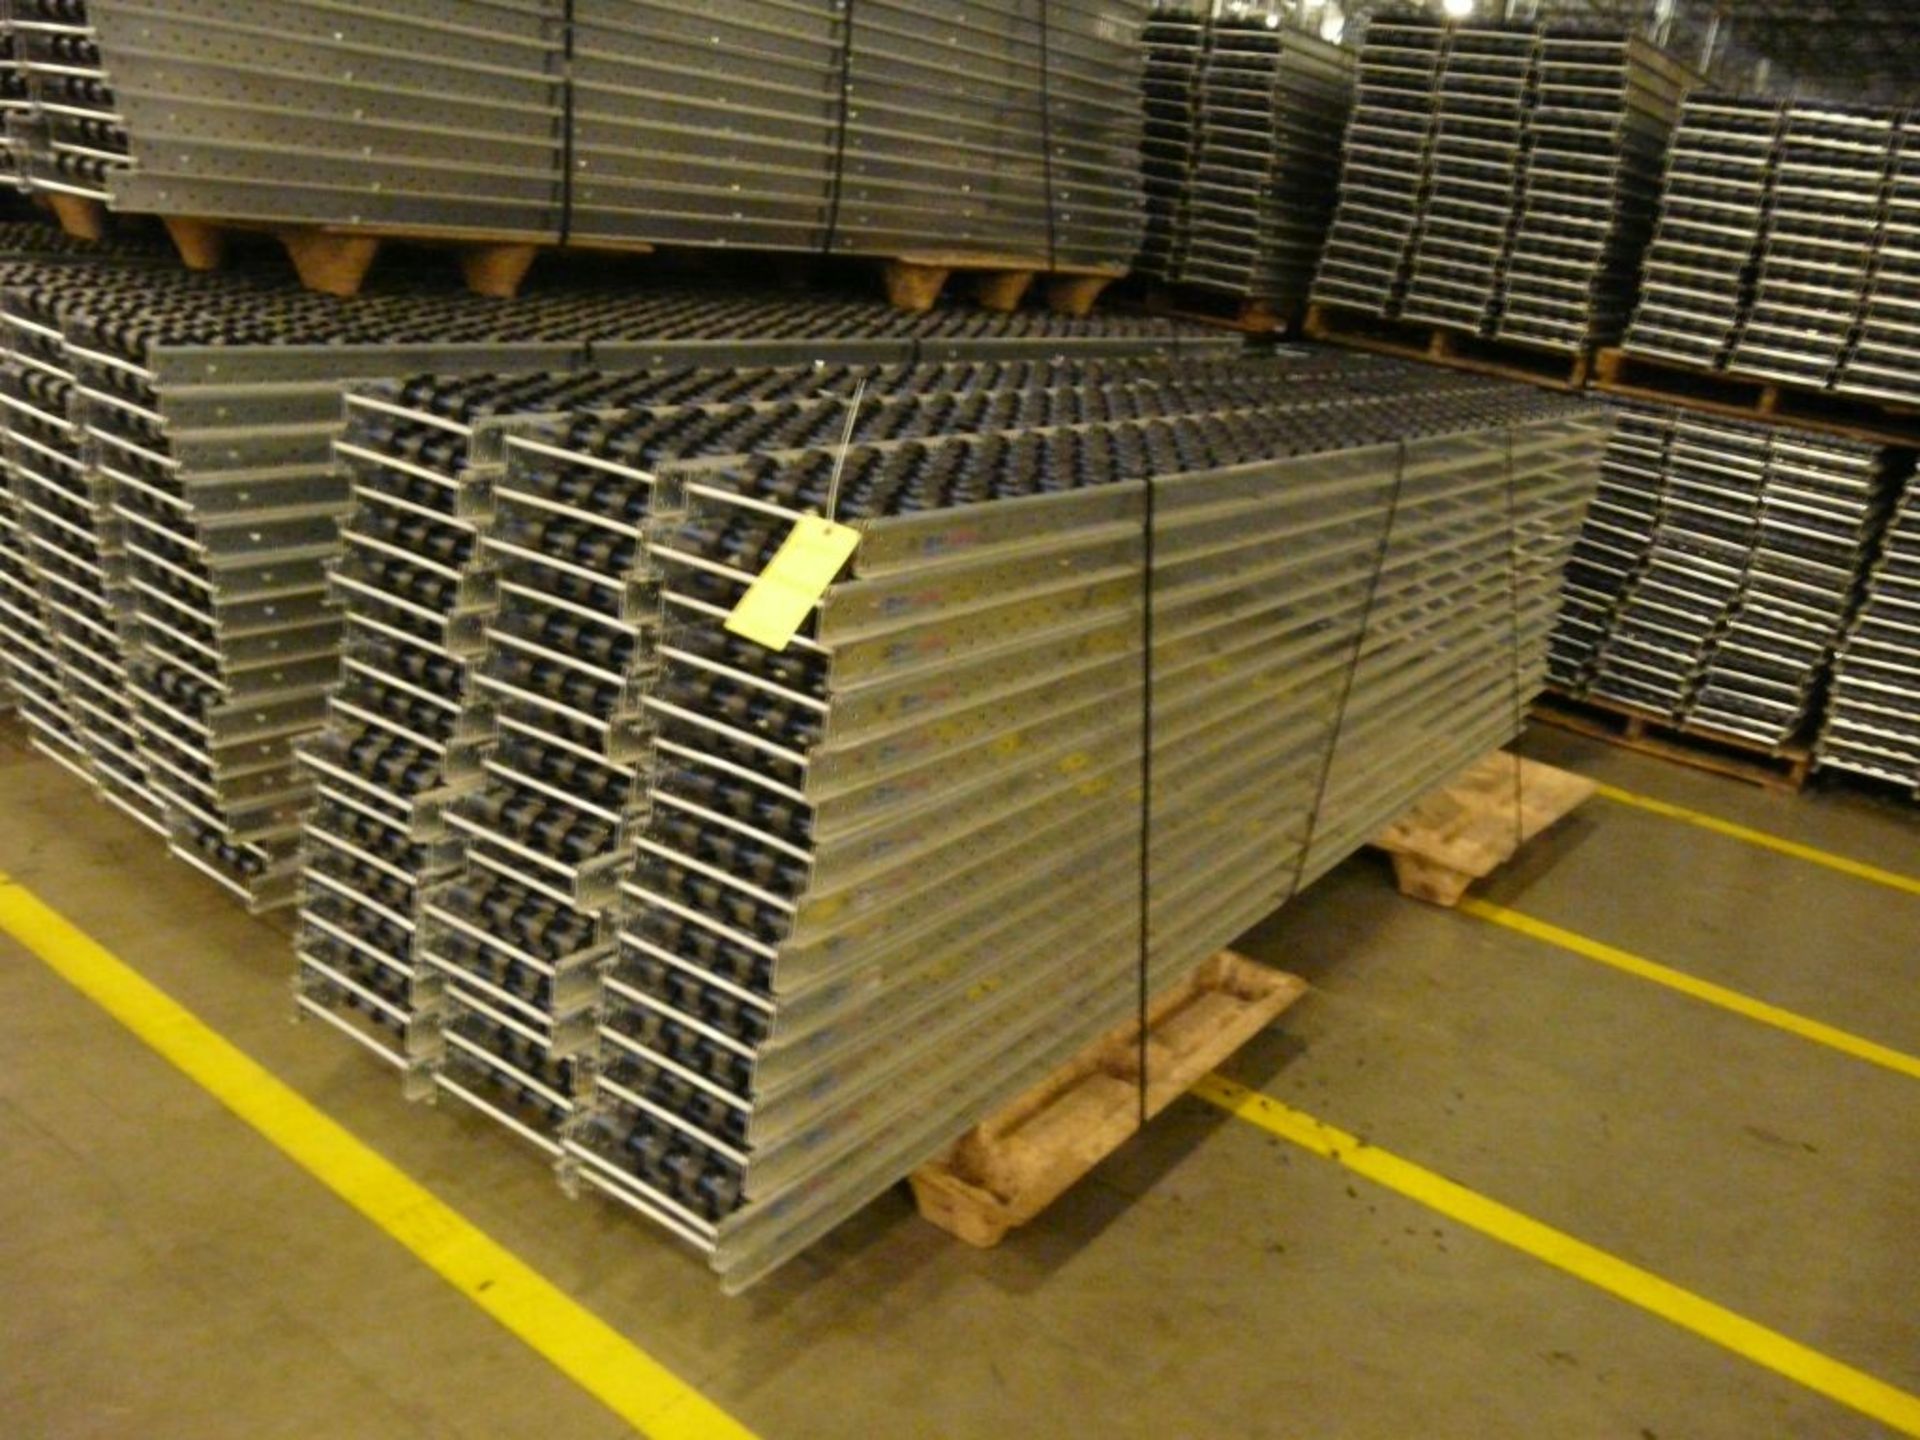 Lot of (90) SpanTrack Wheelbed Carton Flow Conveyors - 11.5'L x 11"W; Tag: 223612 - $30 Lot